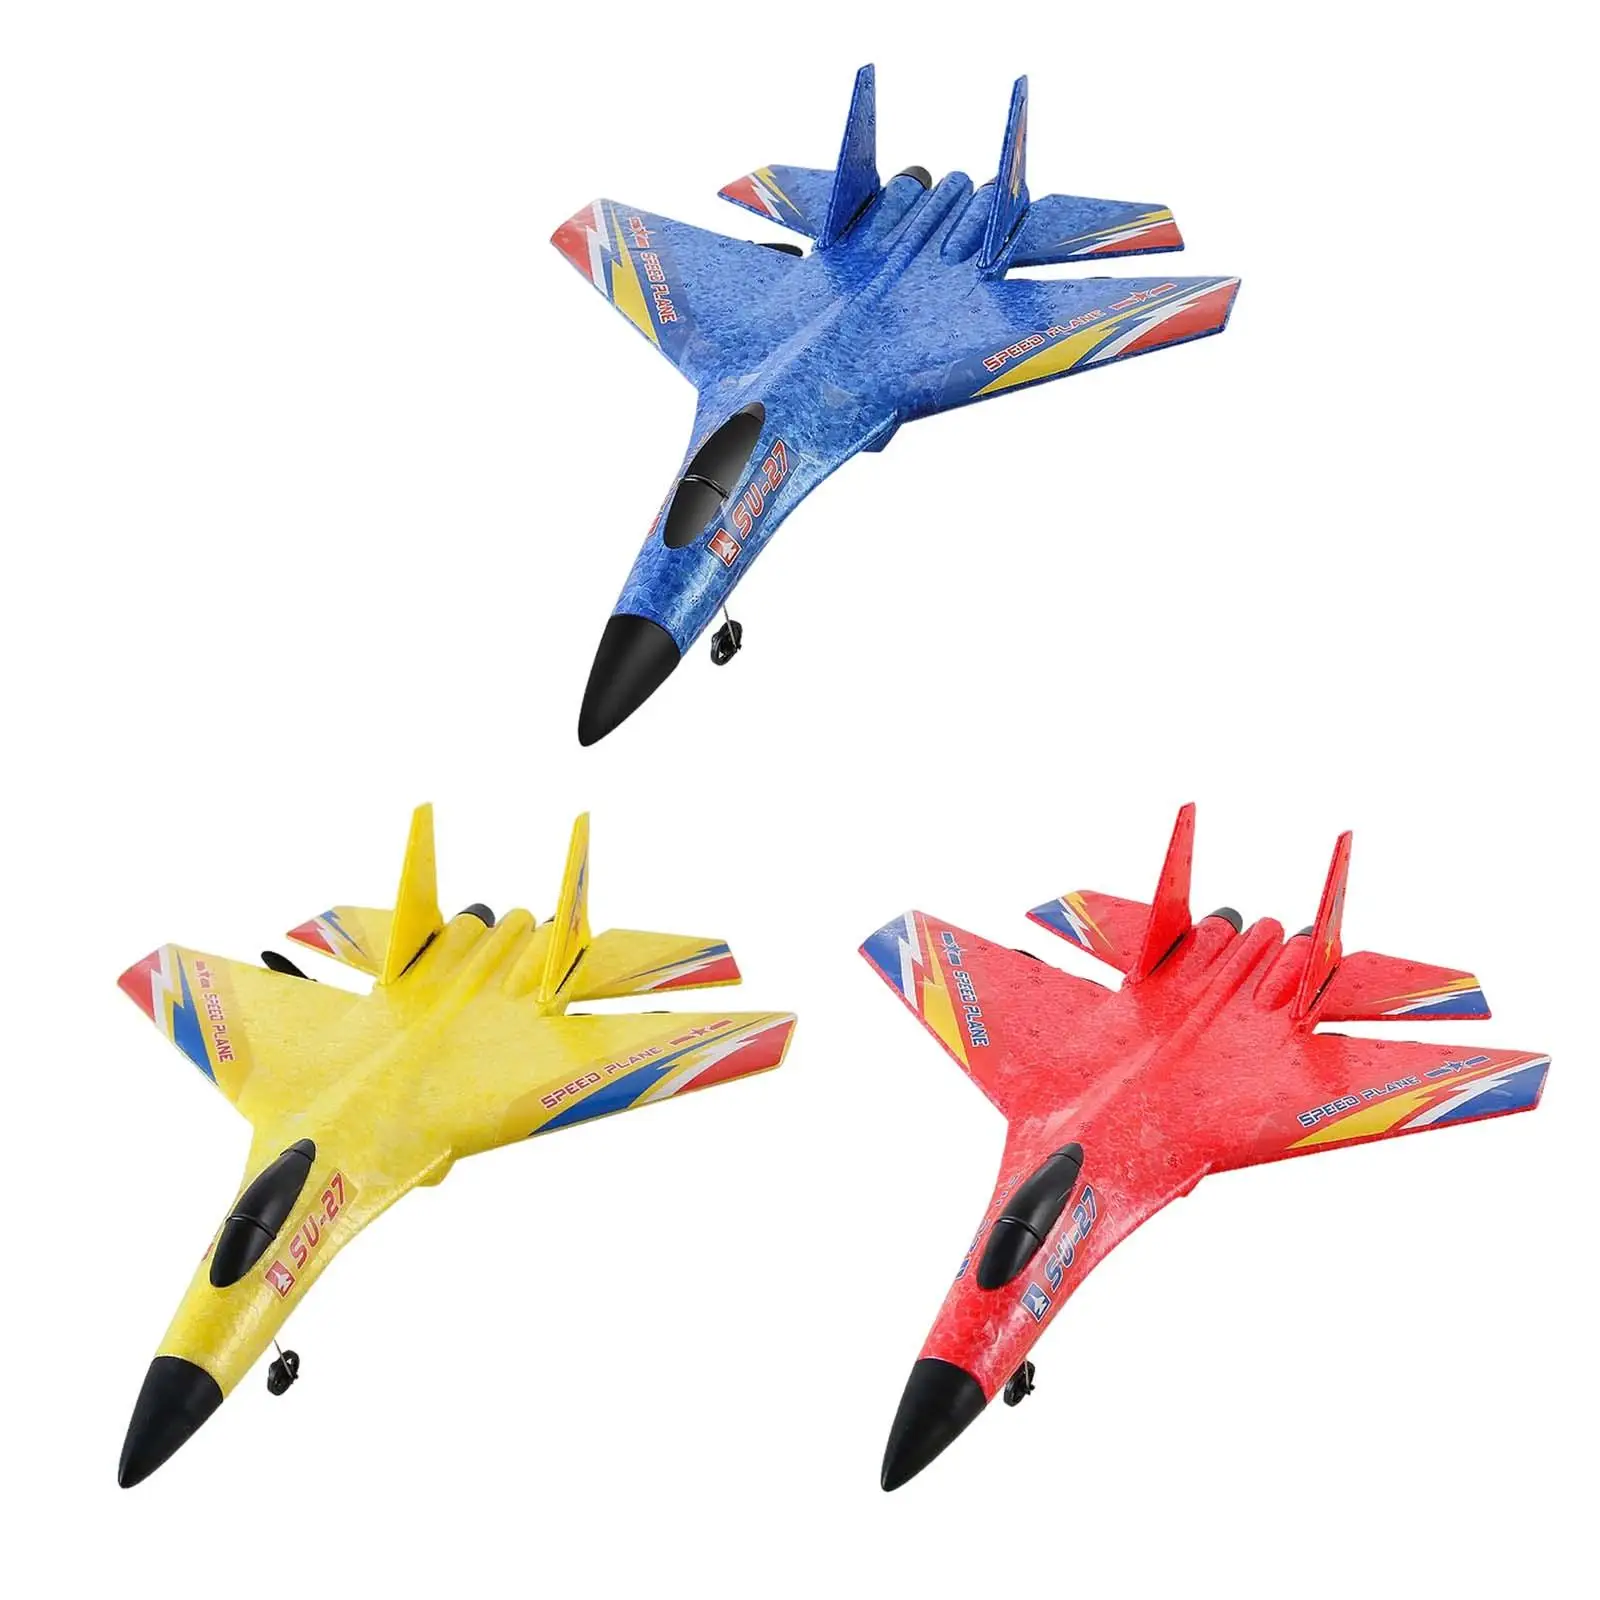 2.4G 2 Channel RC Airplane Aeroplane Radio Control Plane Glider EPP RC Fixed Wing Airplane for Beginners Boys Birthday Gifts